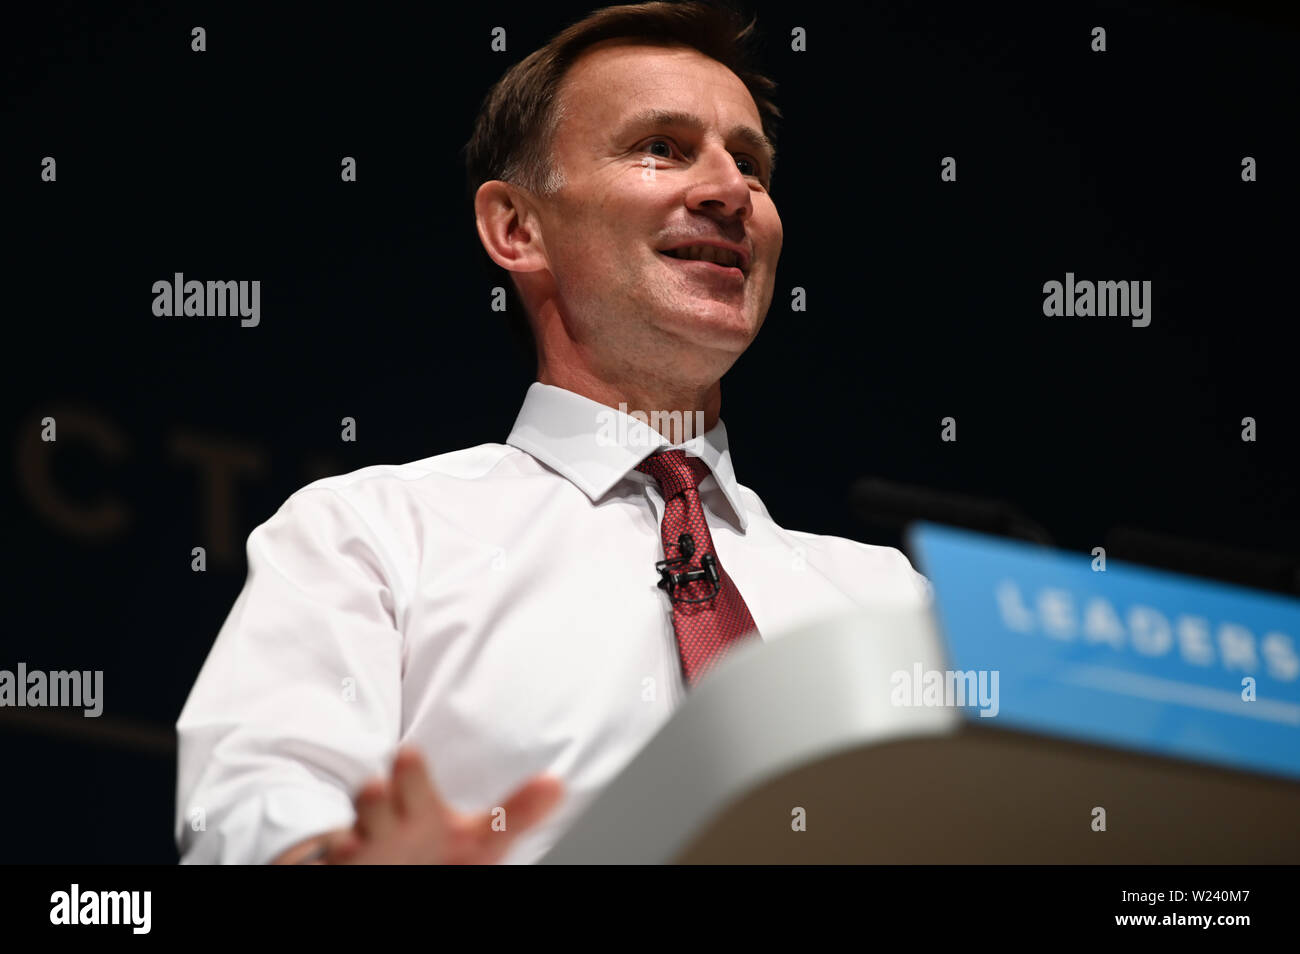 Perth, Scotland, United Kingdom, 05, July, 2019. Conservative Party leadership Jeremy Hunt addresses a leadership election hustings for party members. © Ken Jack / Alamy Live News Stock Photo